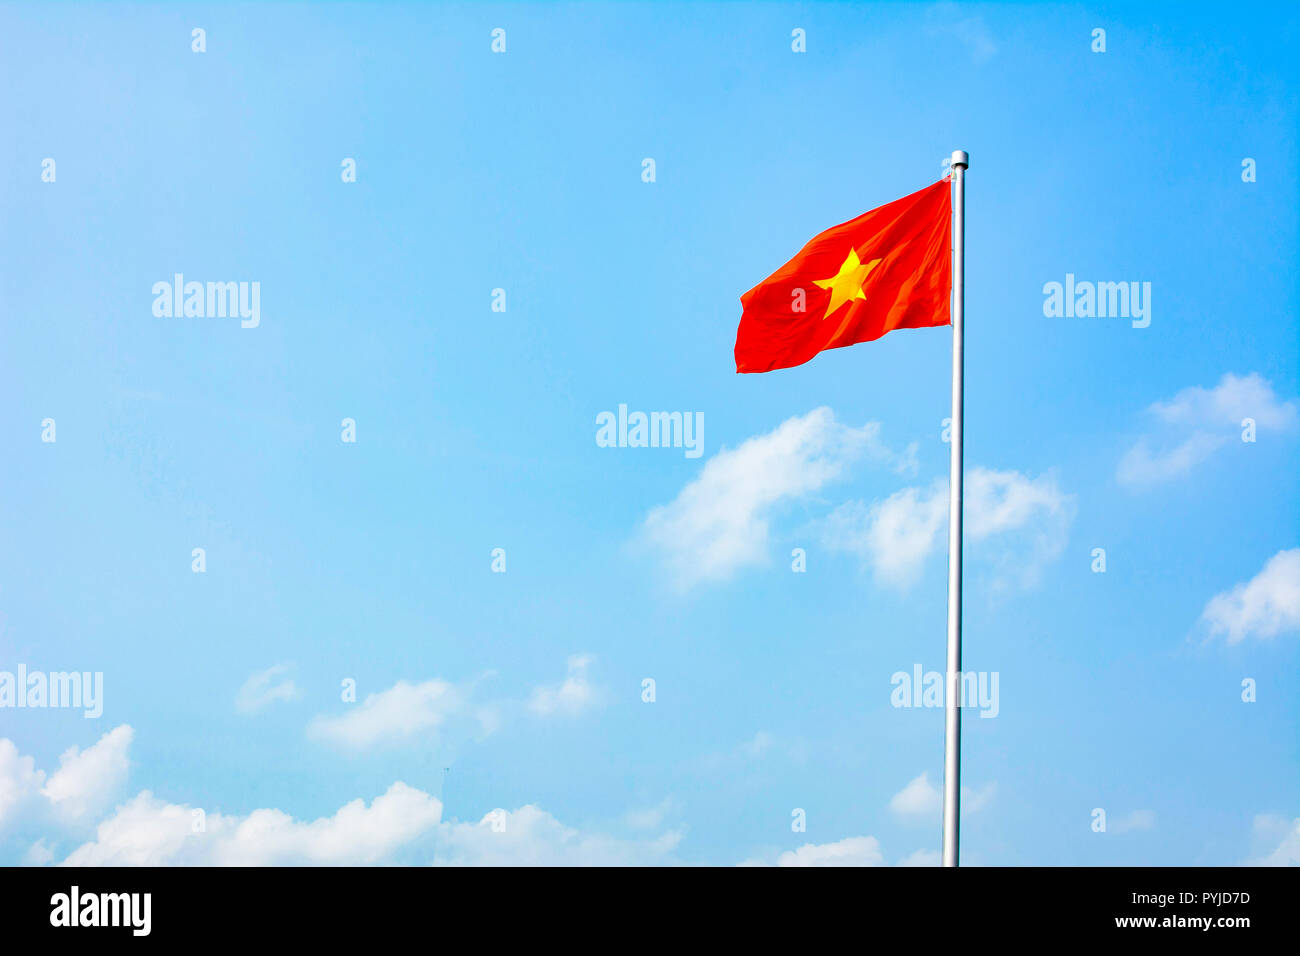 Republic of Vietnam flag winding in the wind against blue sky Stock Photo